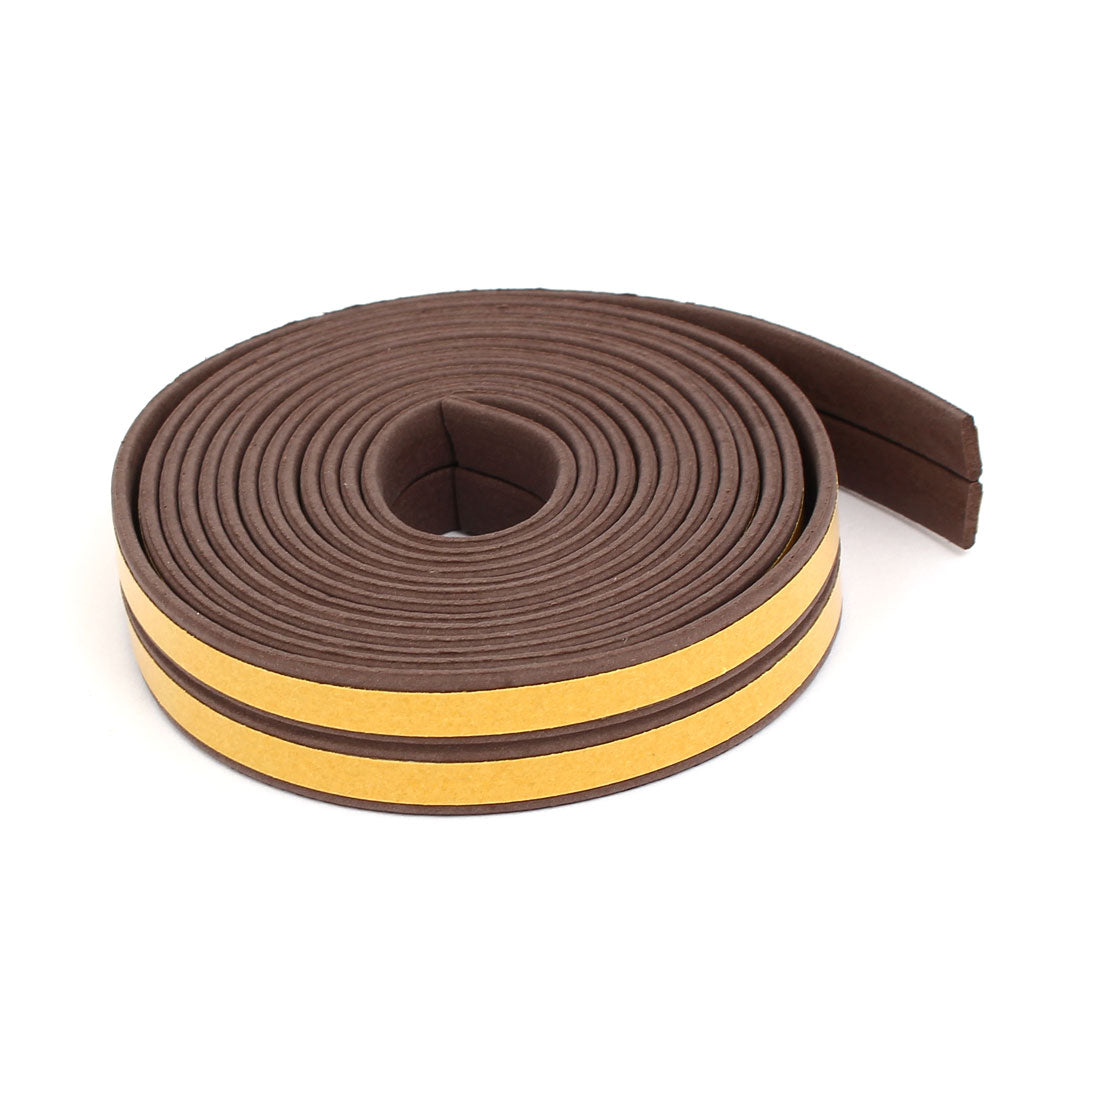 uxcell Uxcell 2.5M 8.2 Feet EPDM Foam Rubber Self Adhesive Weatherstrip Seal Strip Brown 2pcs